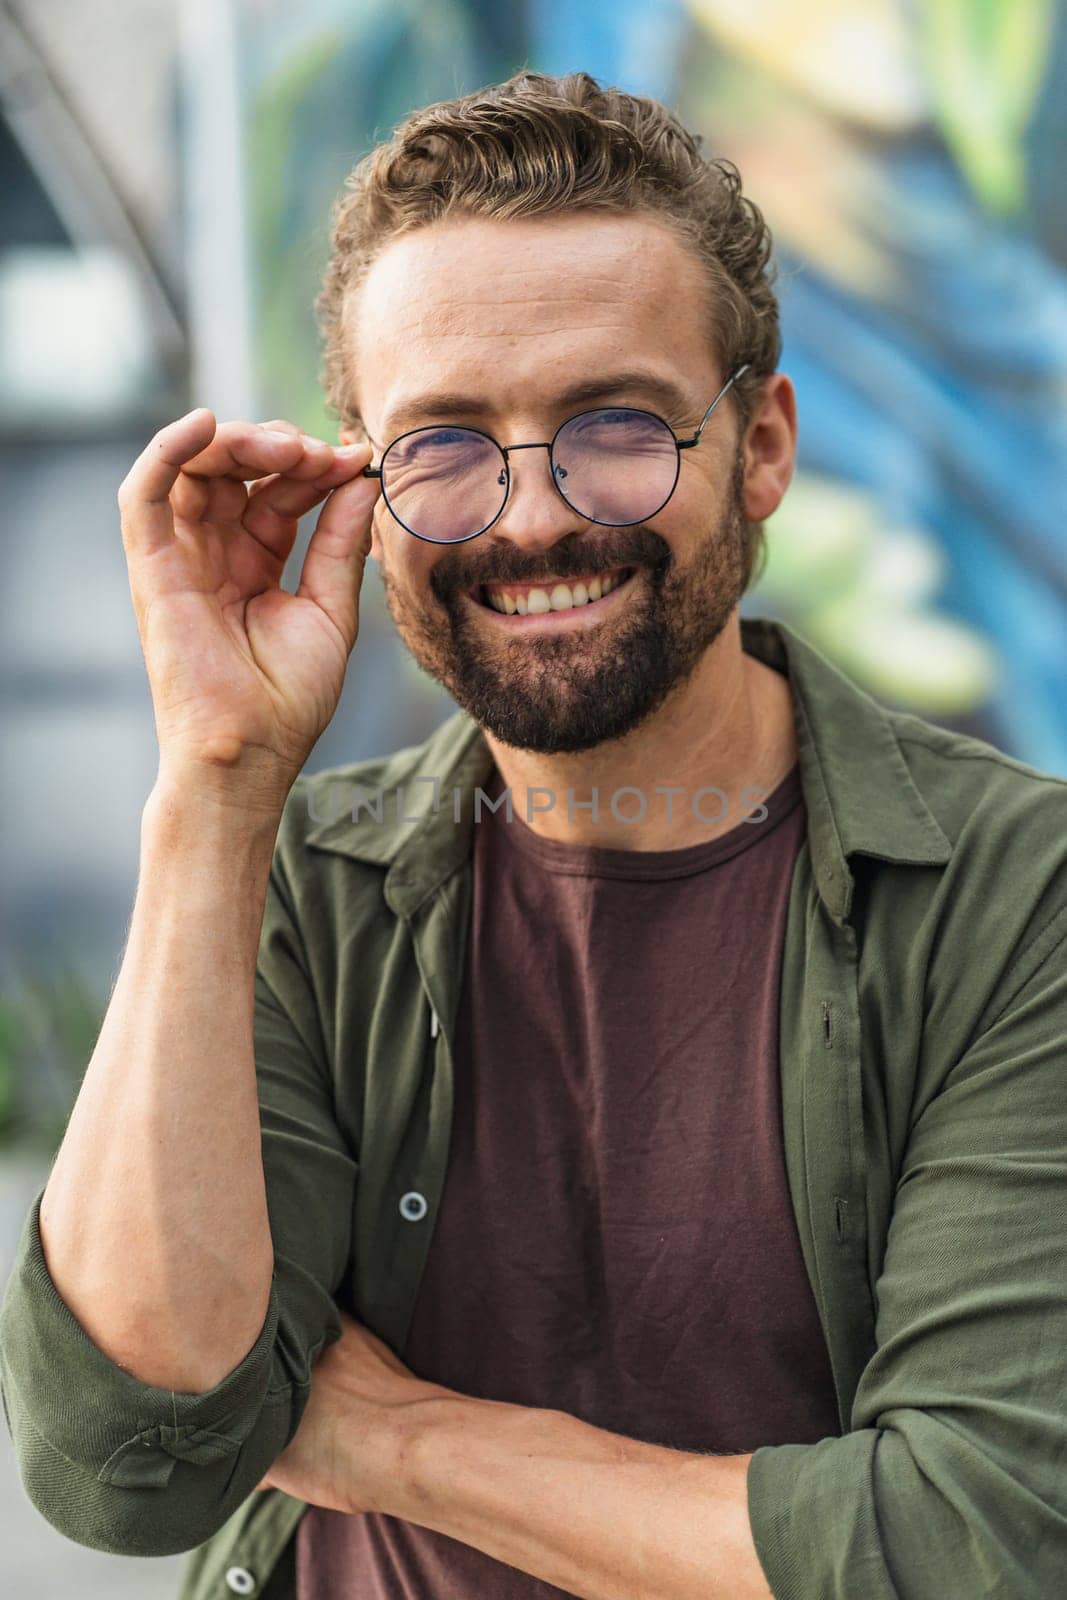 Happy man with warm smile, holding glasses. Joyful expression radiates positivity and contentment, showcasing sense of inner satisfaction. With confident and friendly demeanor, exudes approachability and charm. . High quality photo